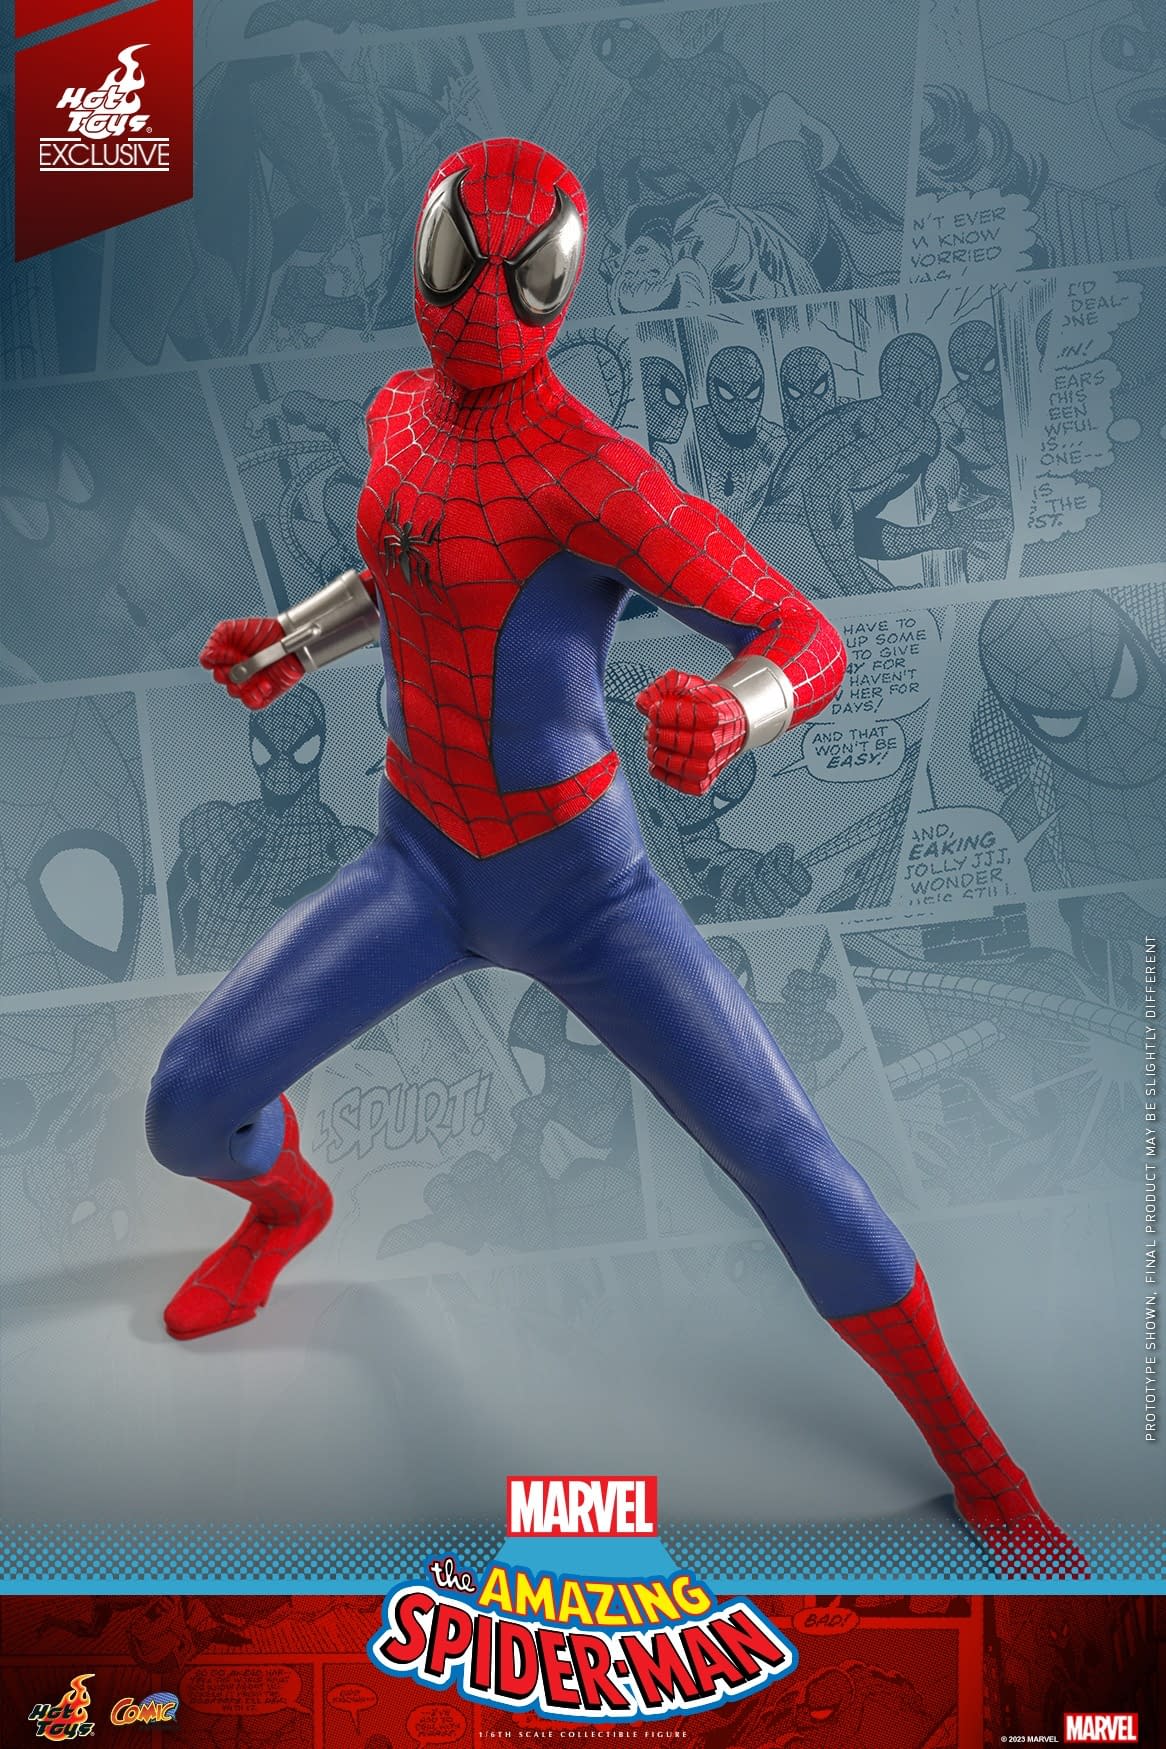 Spider-Man Receives Exclusive Marvel Comics 1/6 Figure from Hot Toys6